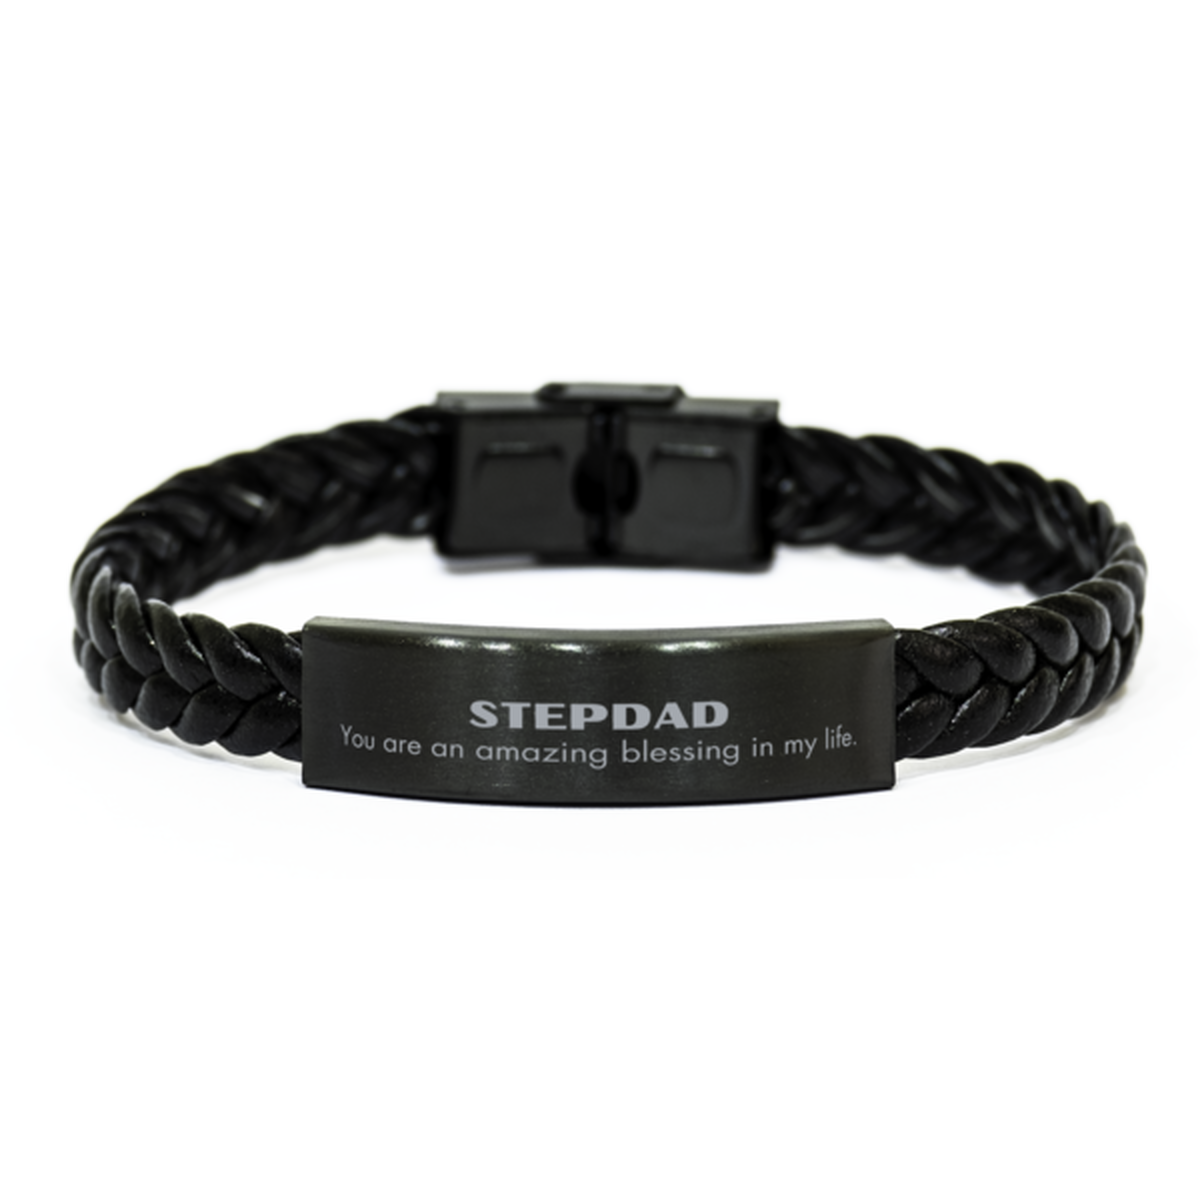 Stepdad Braided Leather Bracelet, You are an amazing blessing in my life, Thank You Gifts For Stepdad, Inspirational Birthday Christmas Unique Gifts For Stepdad